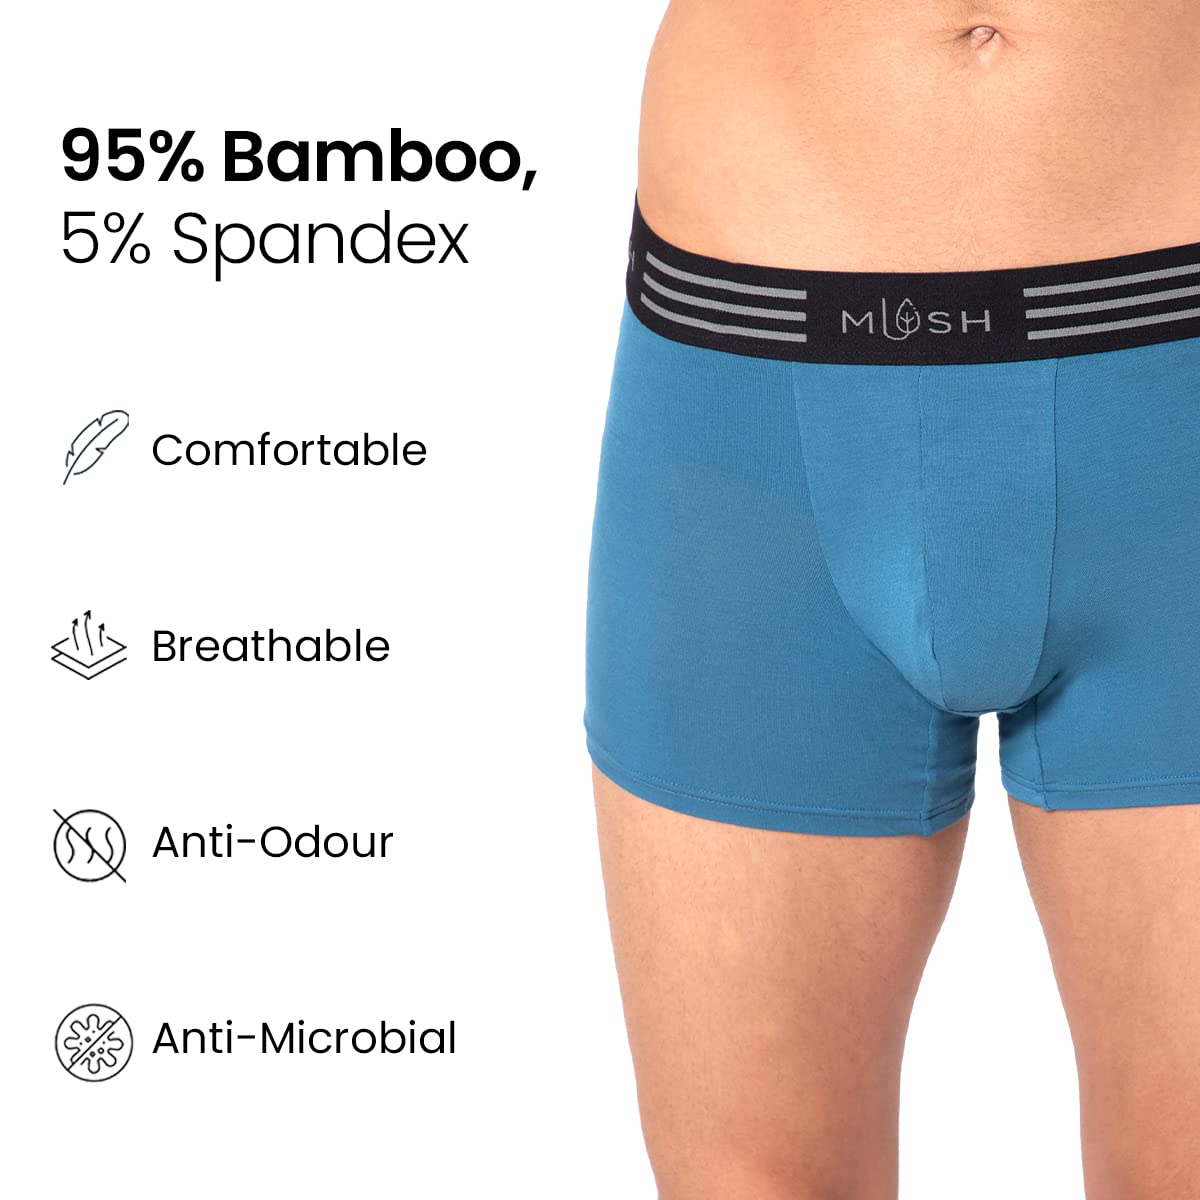 Mush Ultra Soft, Breathable, Feather Light Men's Bamboo Trunk || Naturally Anti-Odor and Anti-Microbial Bamboo Innerwear Pack of 2 (S, Blue and White)